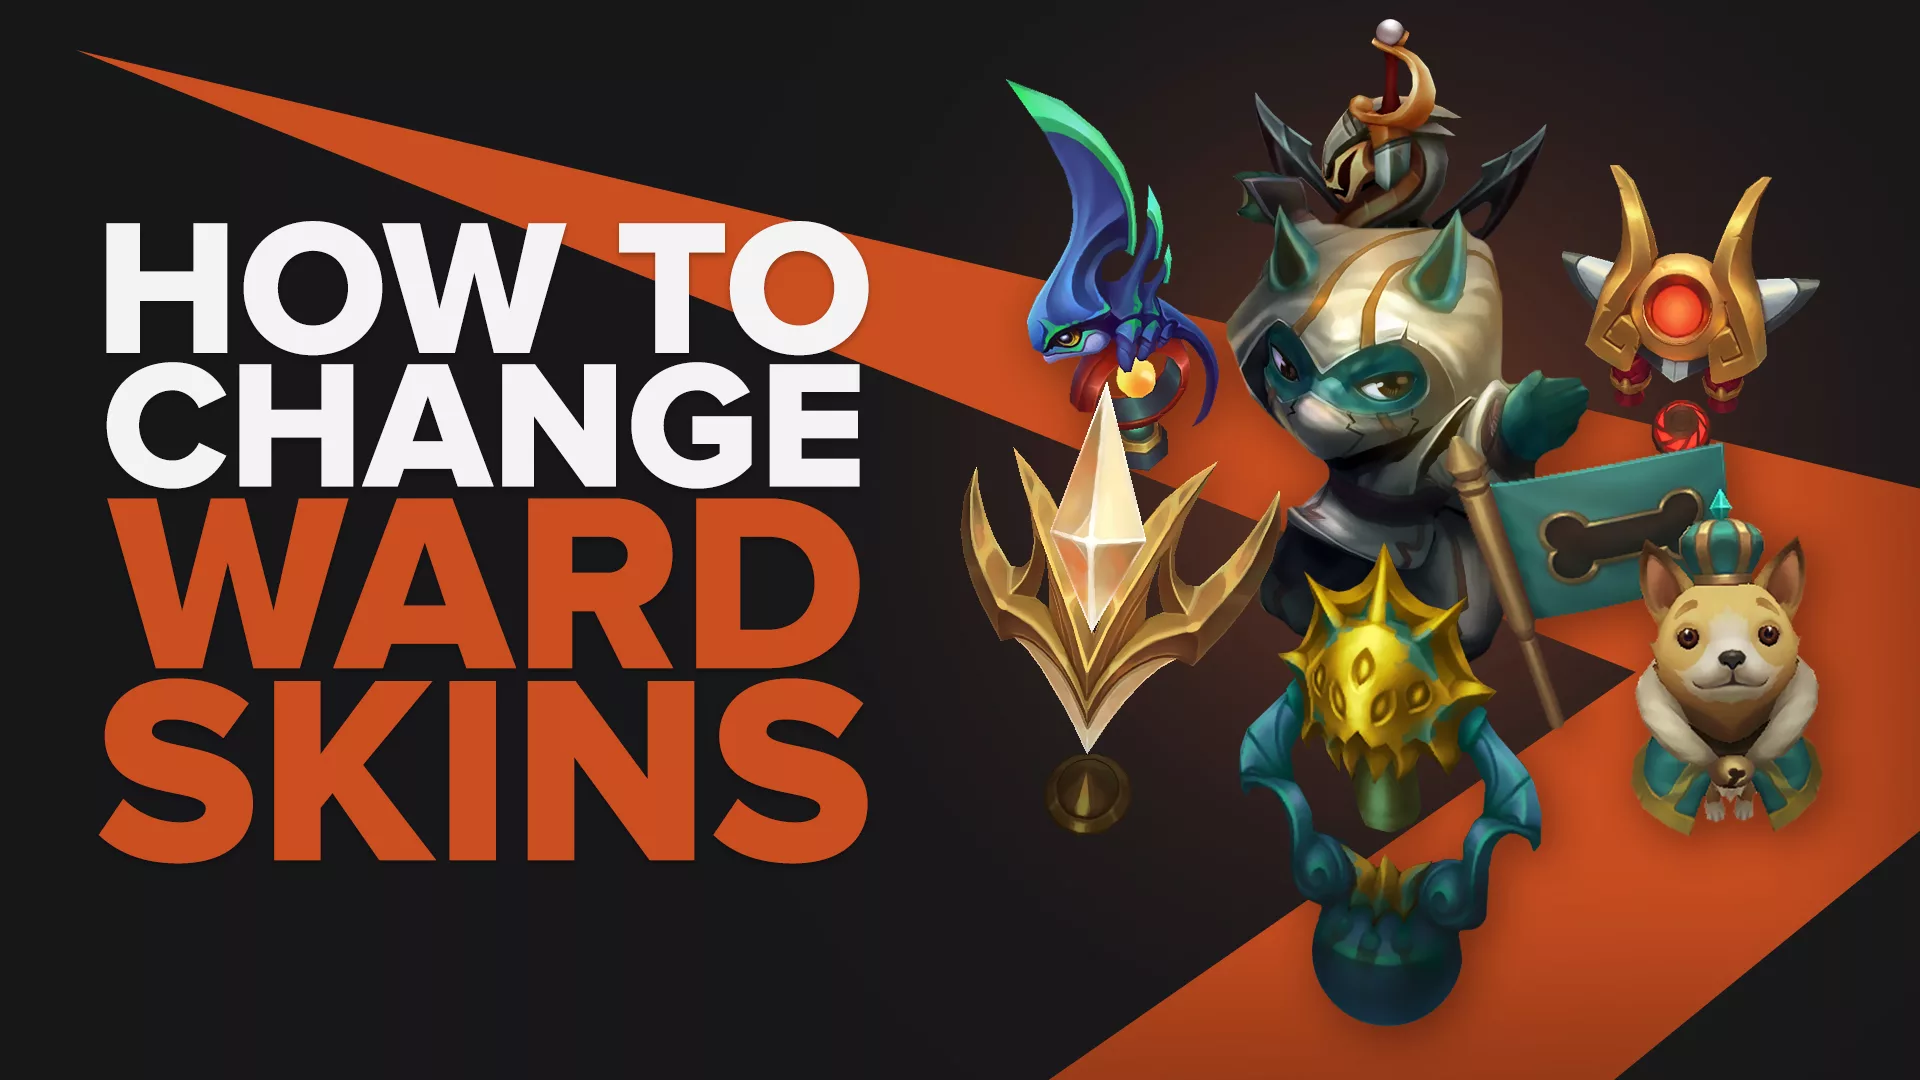 How To Change Ward Skins in League of Legends